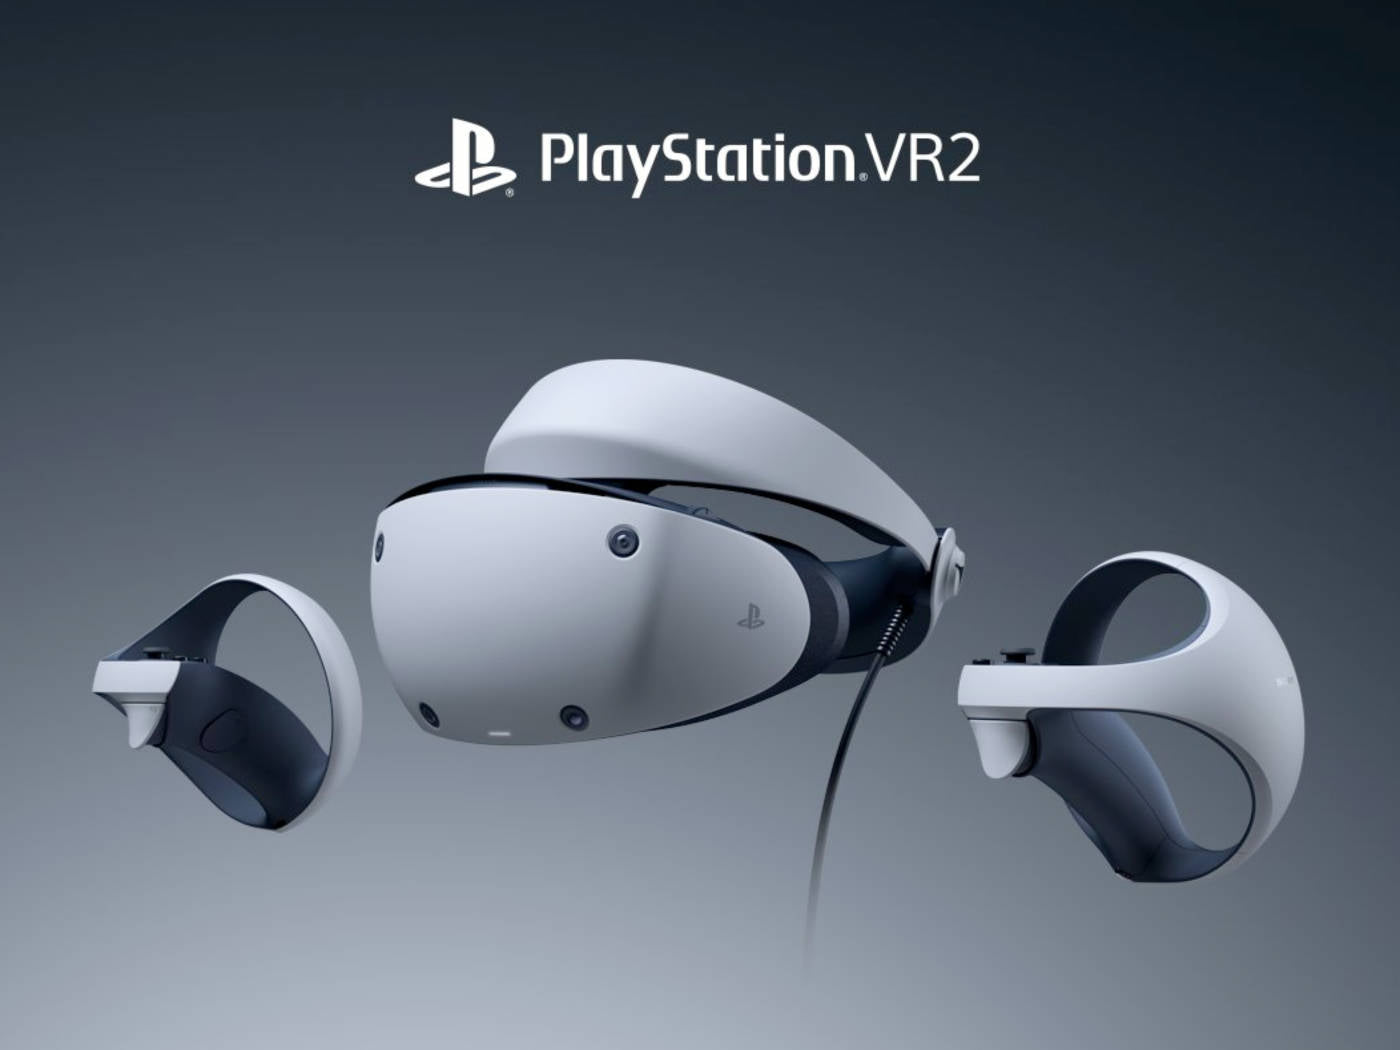 PSVR 2 Introduction: A Comprehensive Guide to Price, Games, Specs, and Features